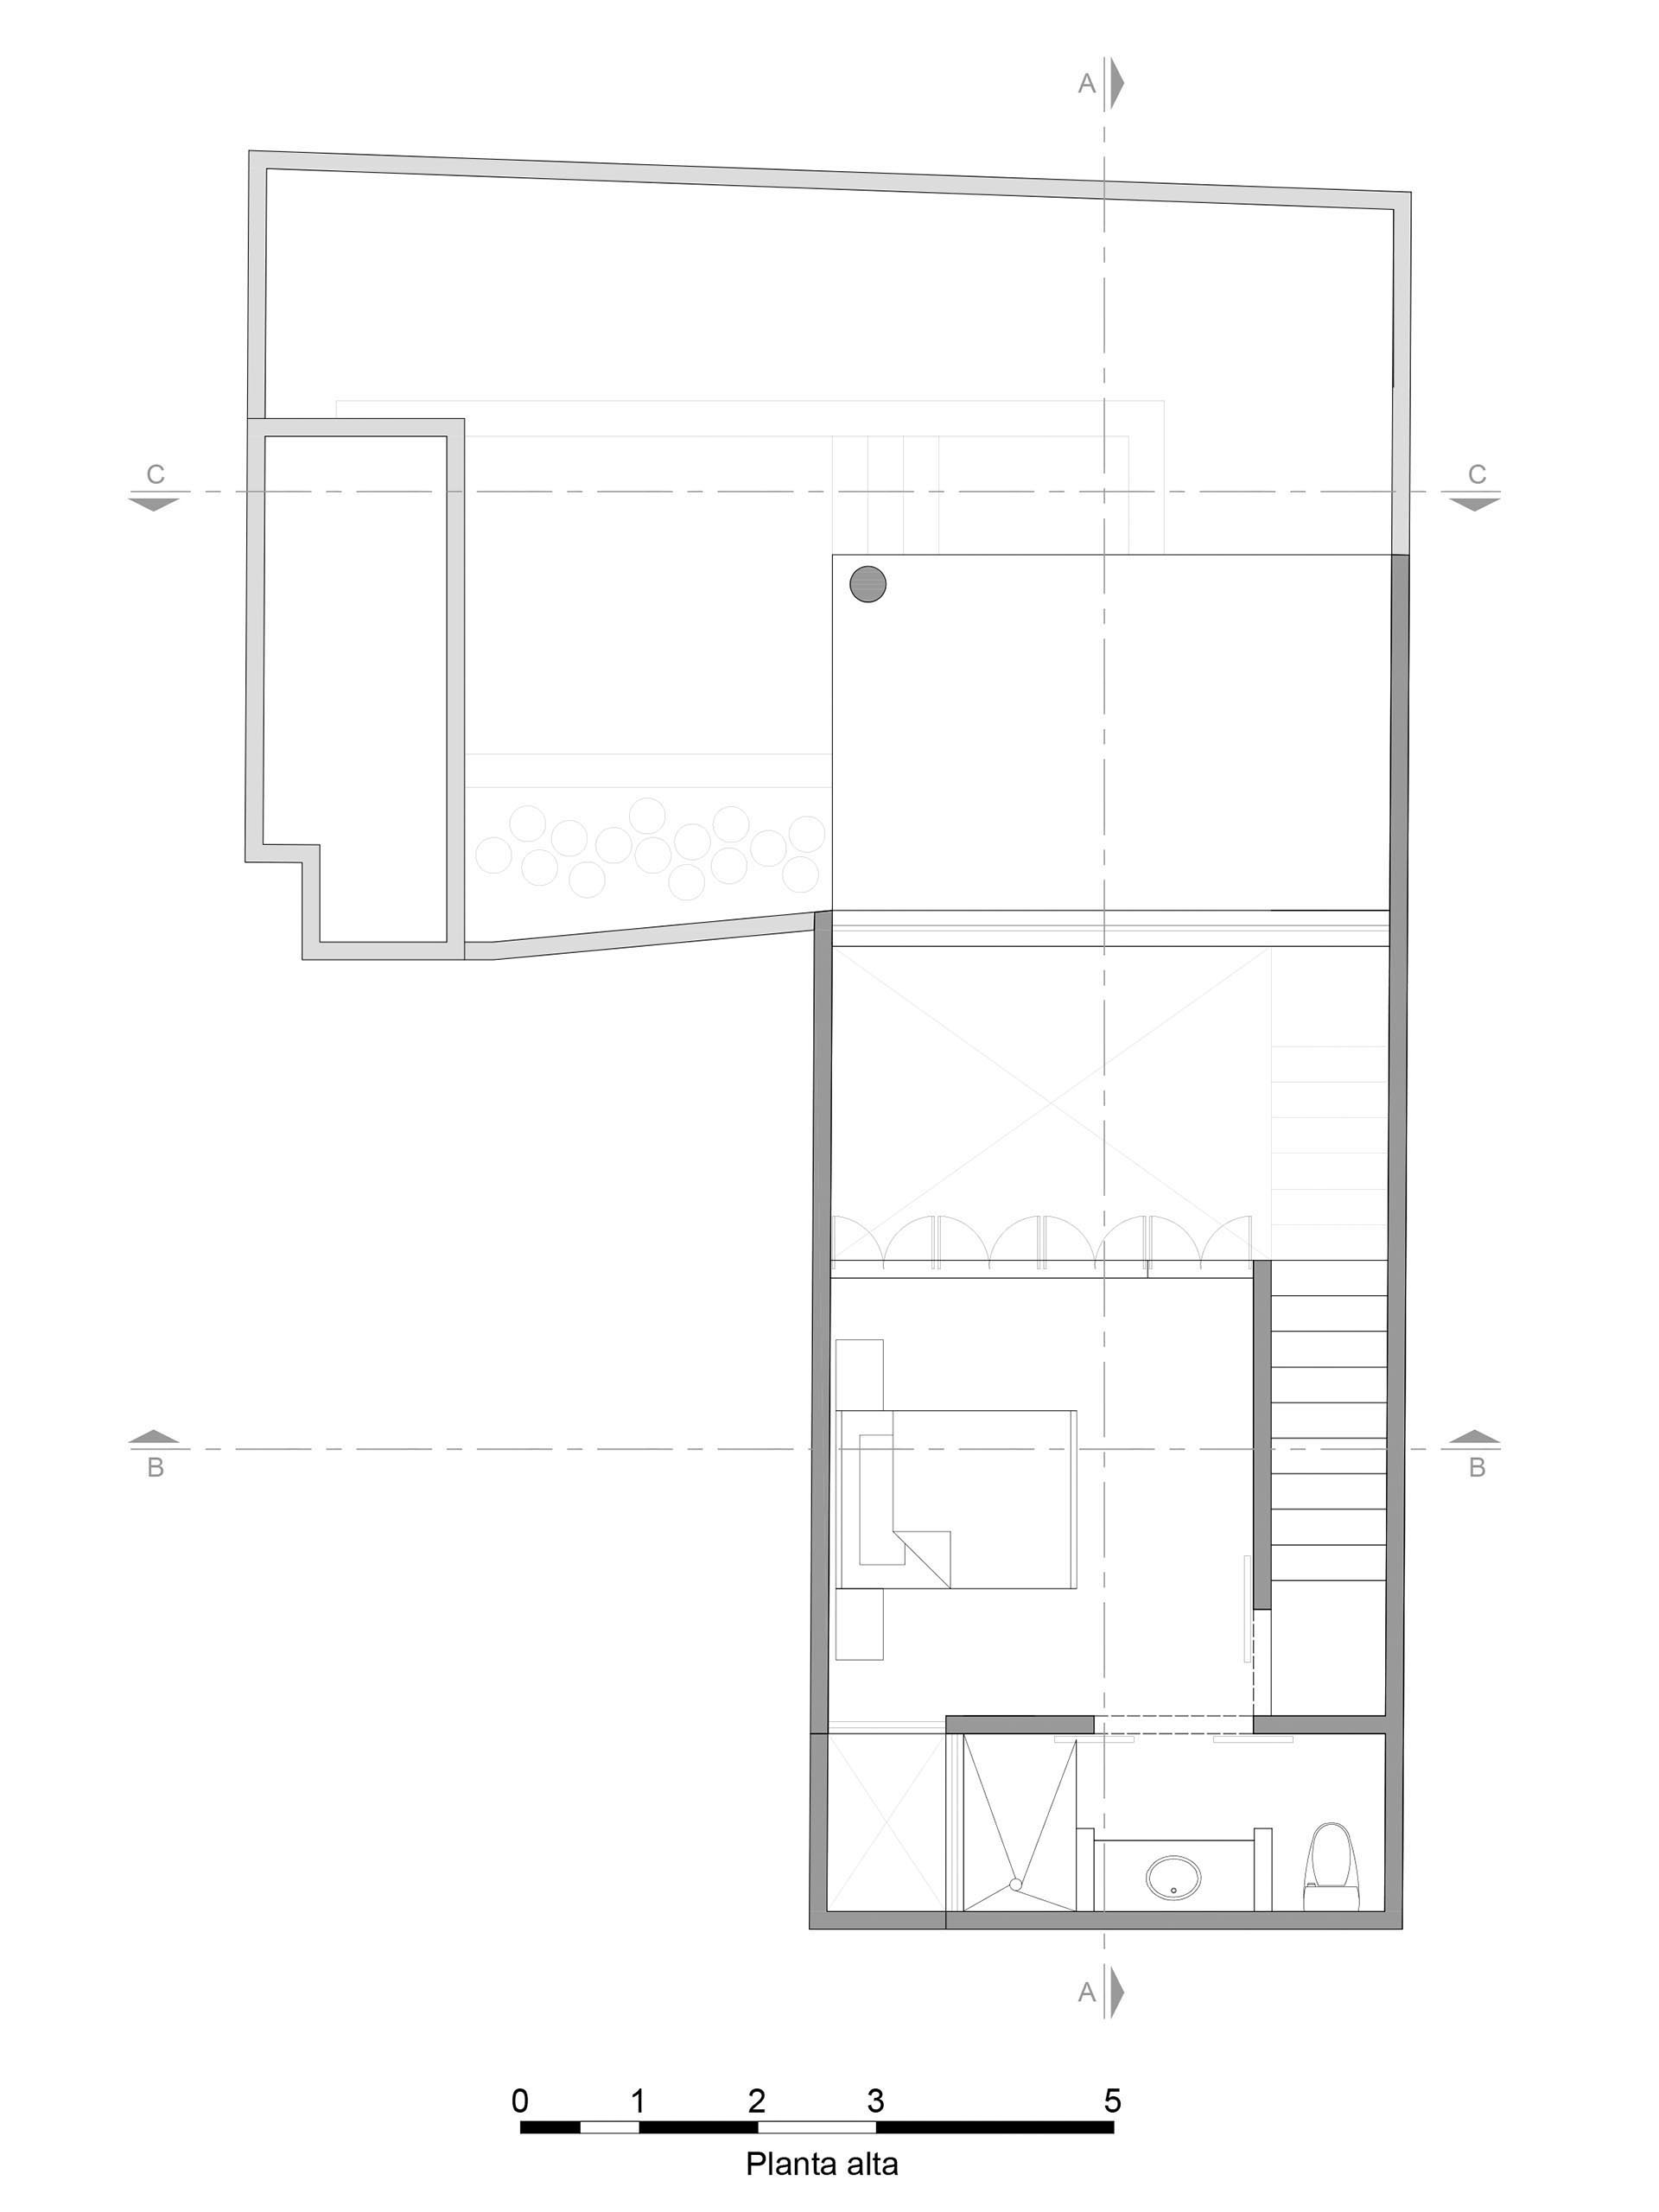 The floor plan of the second story that includes a single bedroom and en-suite bathroom.